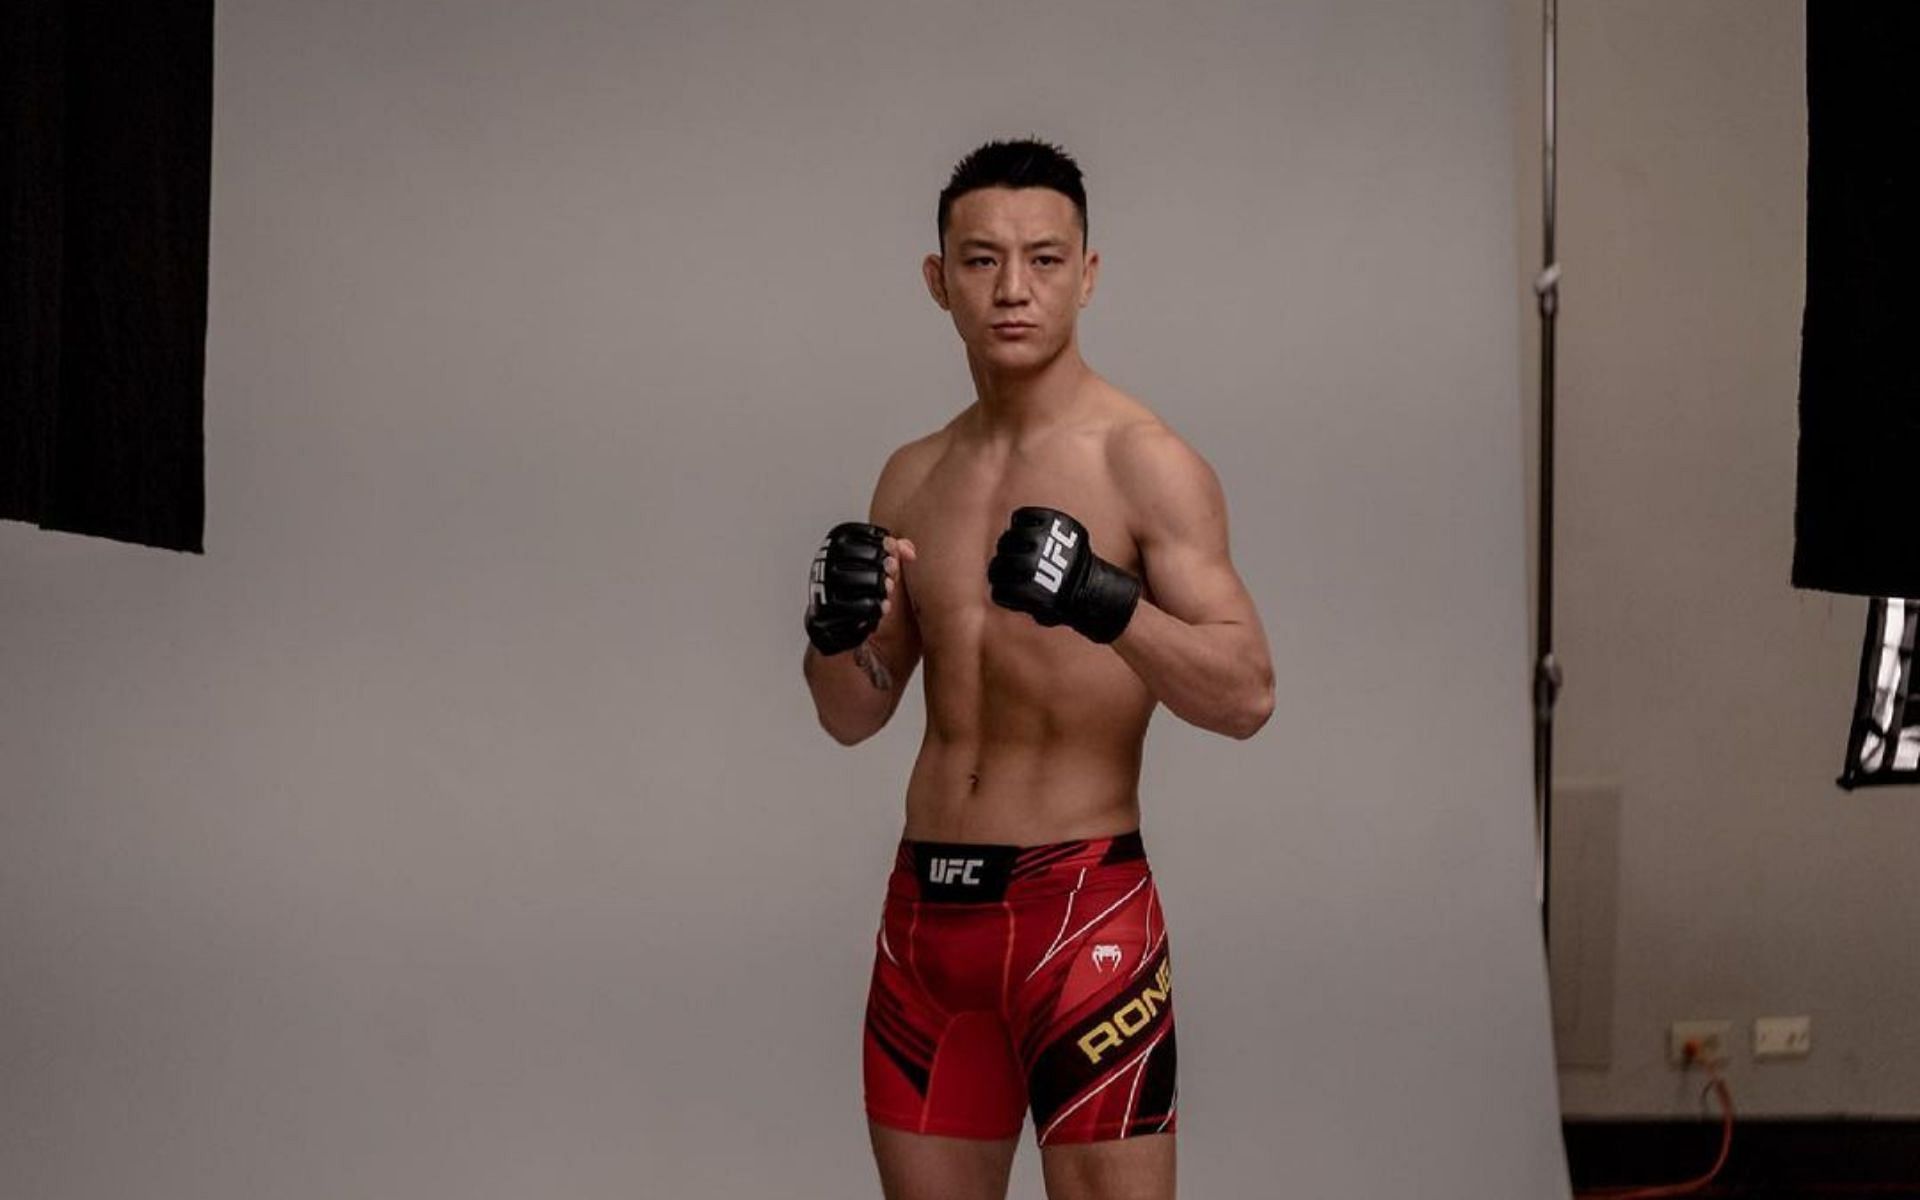 Rong Zhu is back in the UFC [Image via: @rongzhu.mma on Instagram]